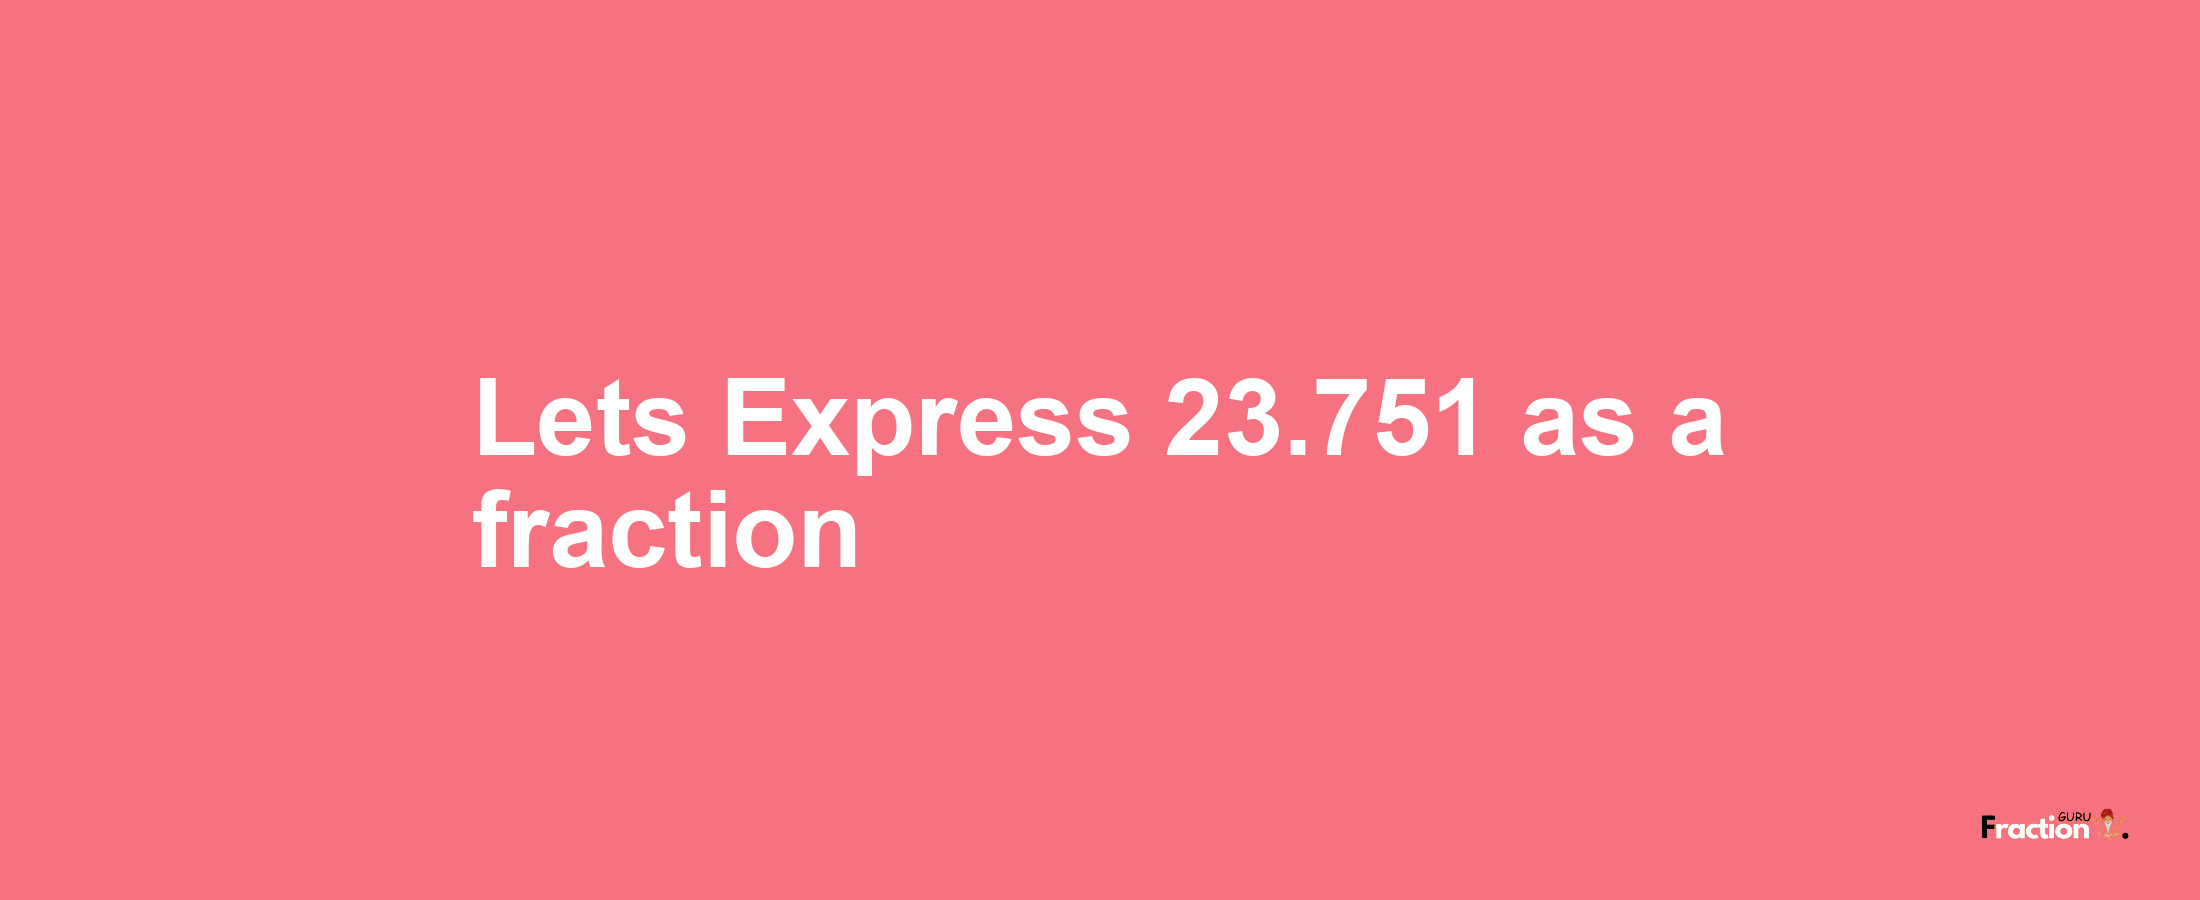 Lets Express 23.751 as afraction